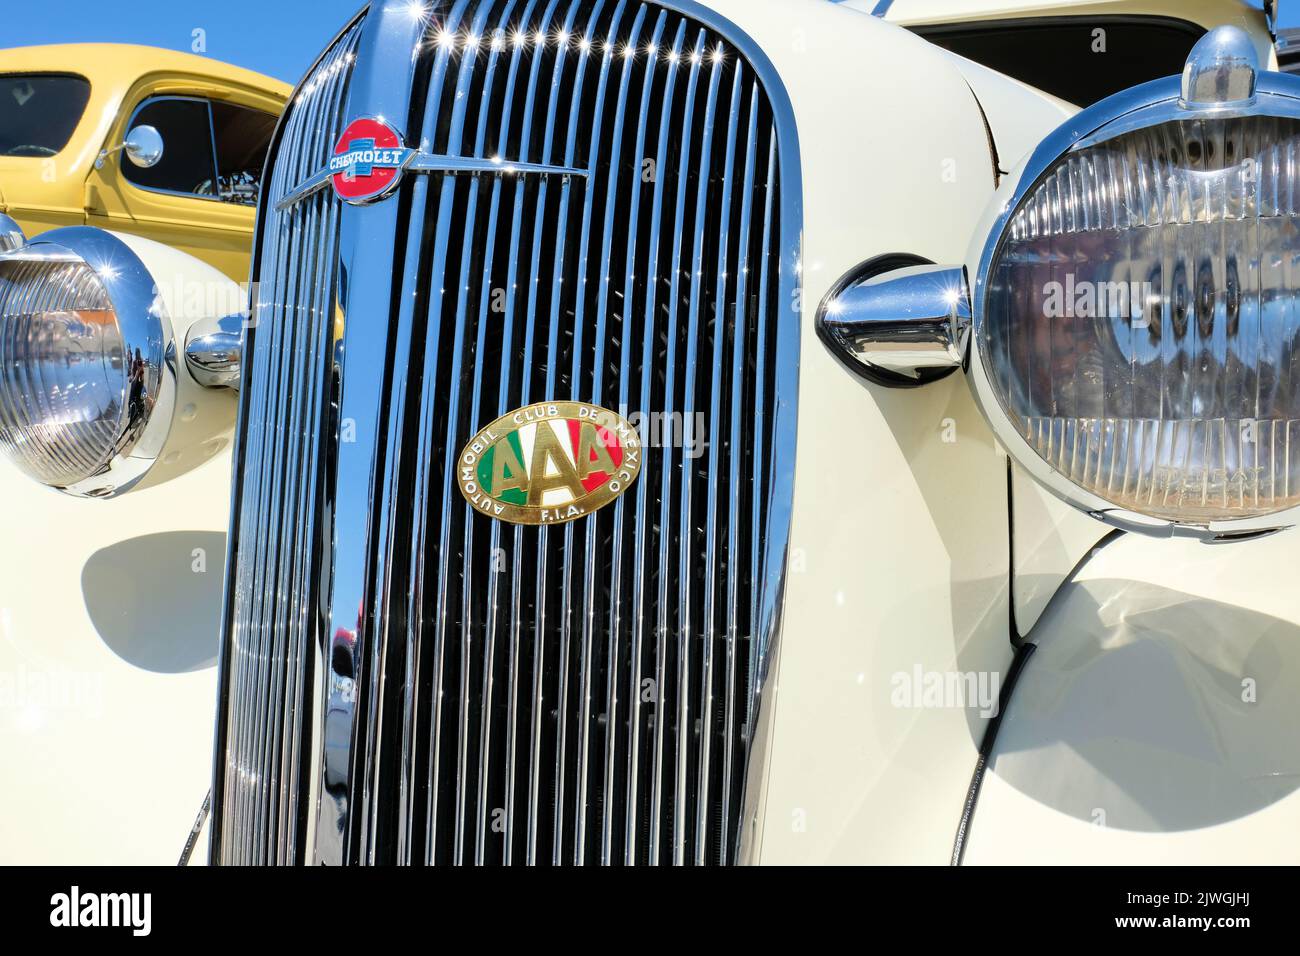 1930s Chevrolet car with a Mexico Automobile Club badge on the grill, part of the International Automobile Federation. Stock Photo